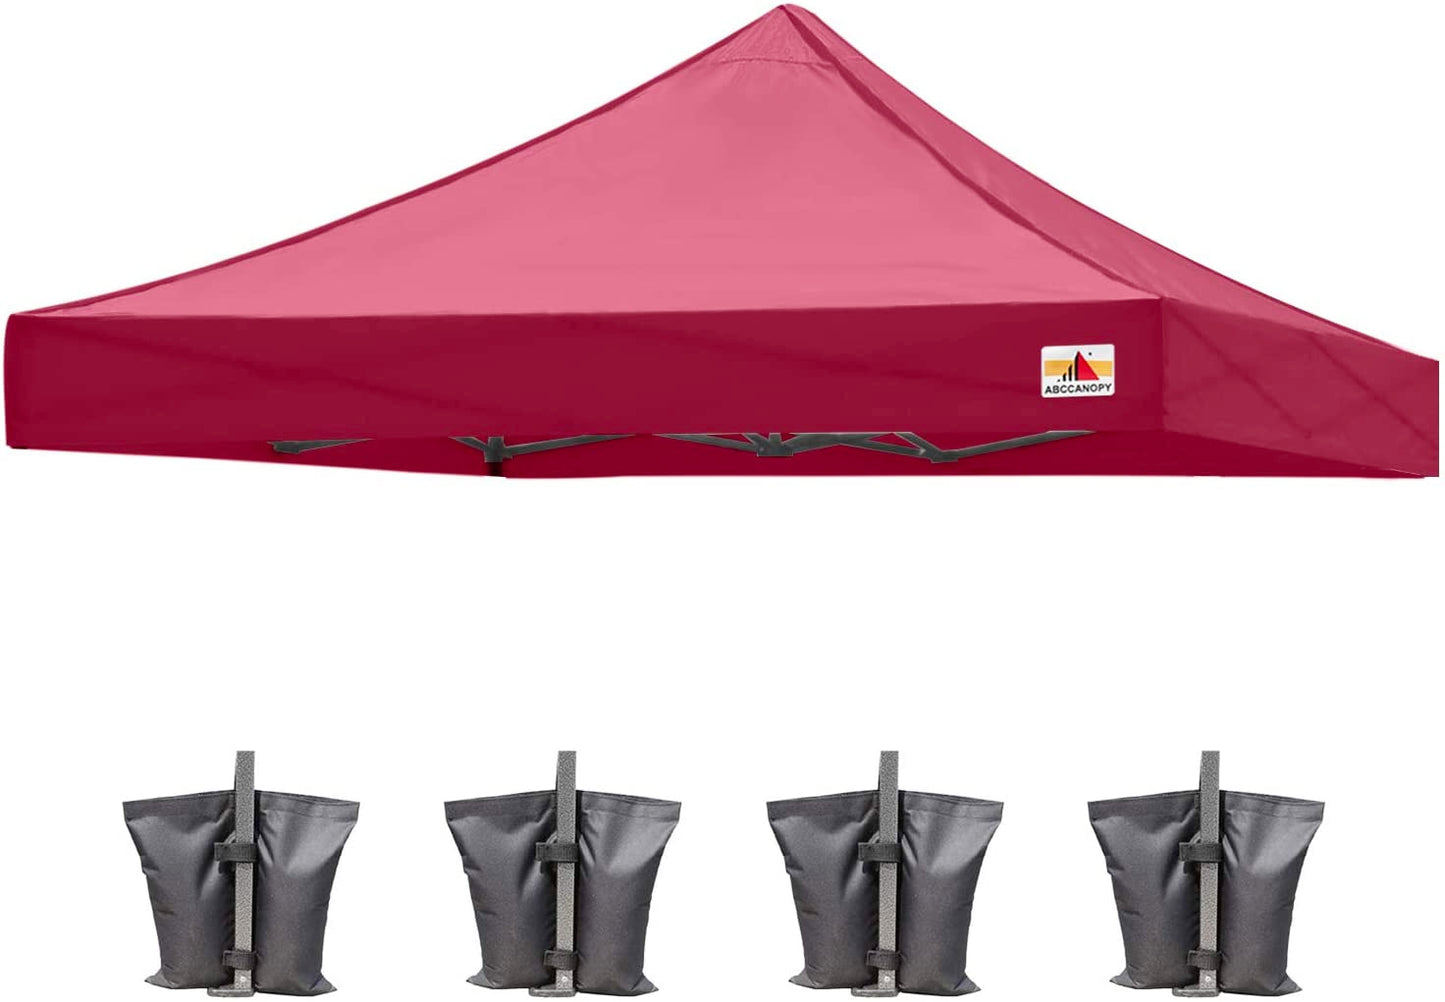 Here, you'll find the Burgundy Canopy TOP created to match the ABCCANOPY Commercial Deluxe 10x10 Canopy. Its tailored design ensures a snug fit and a clean, bright appearance.